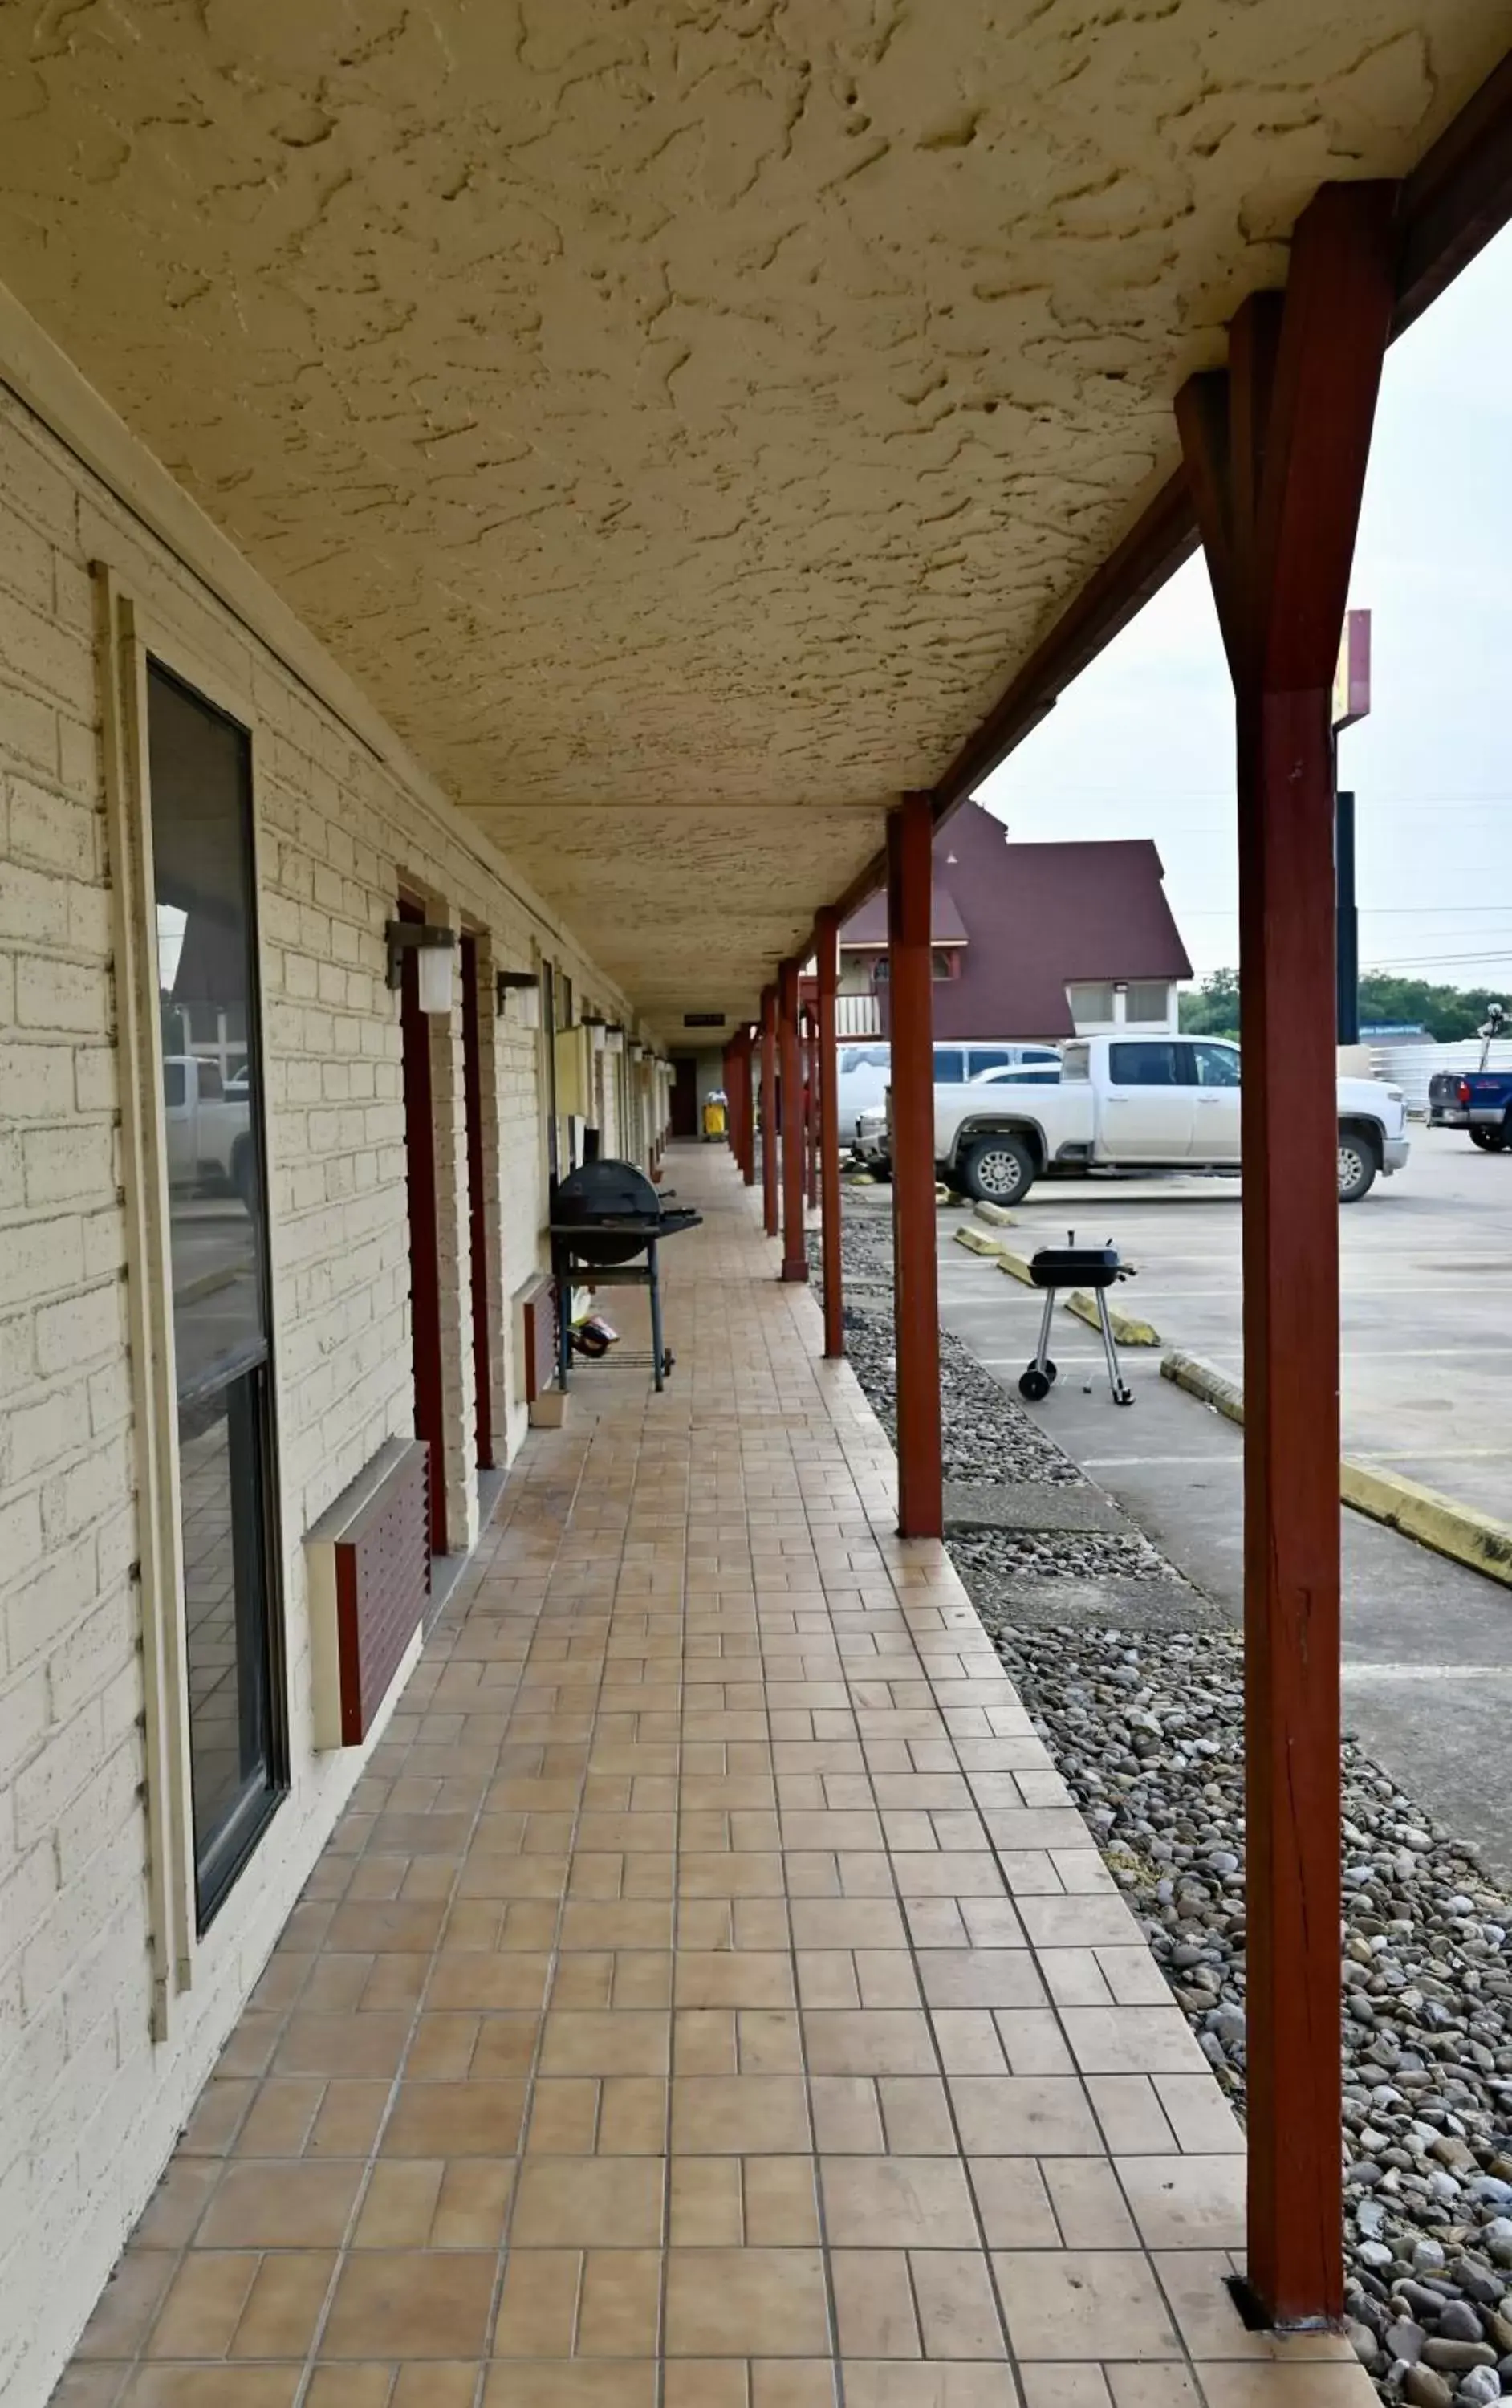 Property building in Rittiman Inn and Suites